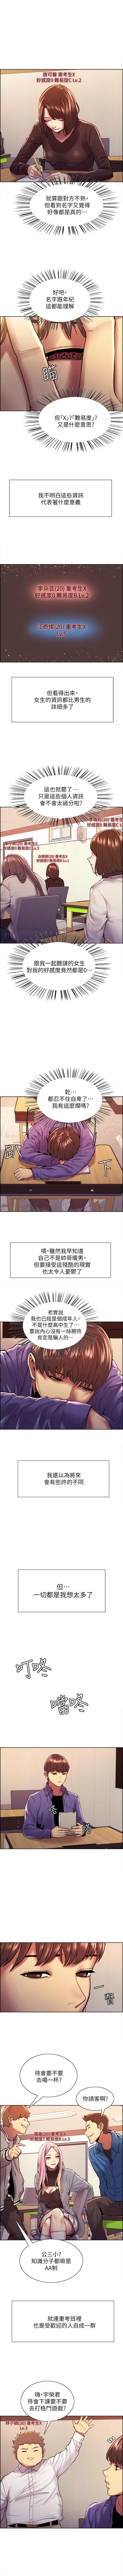 Punished 色輪眼 1-24 官方中文 Prostitute - Page 5